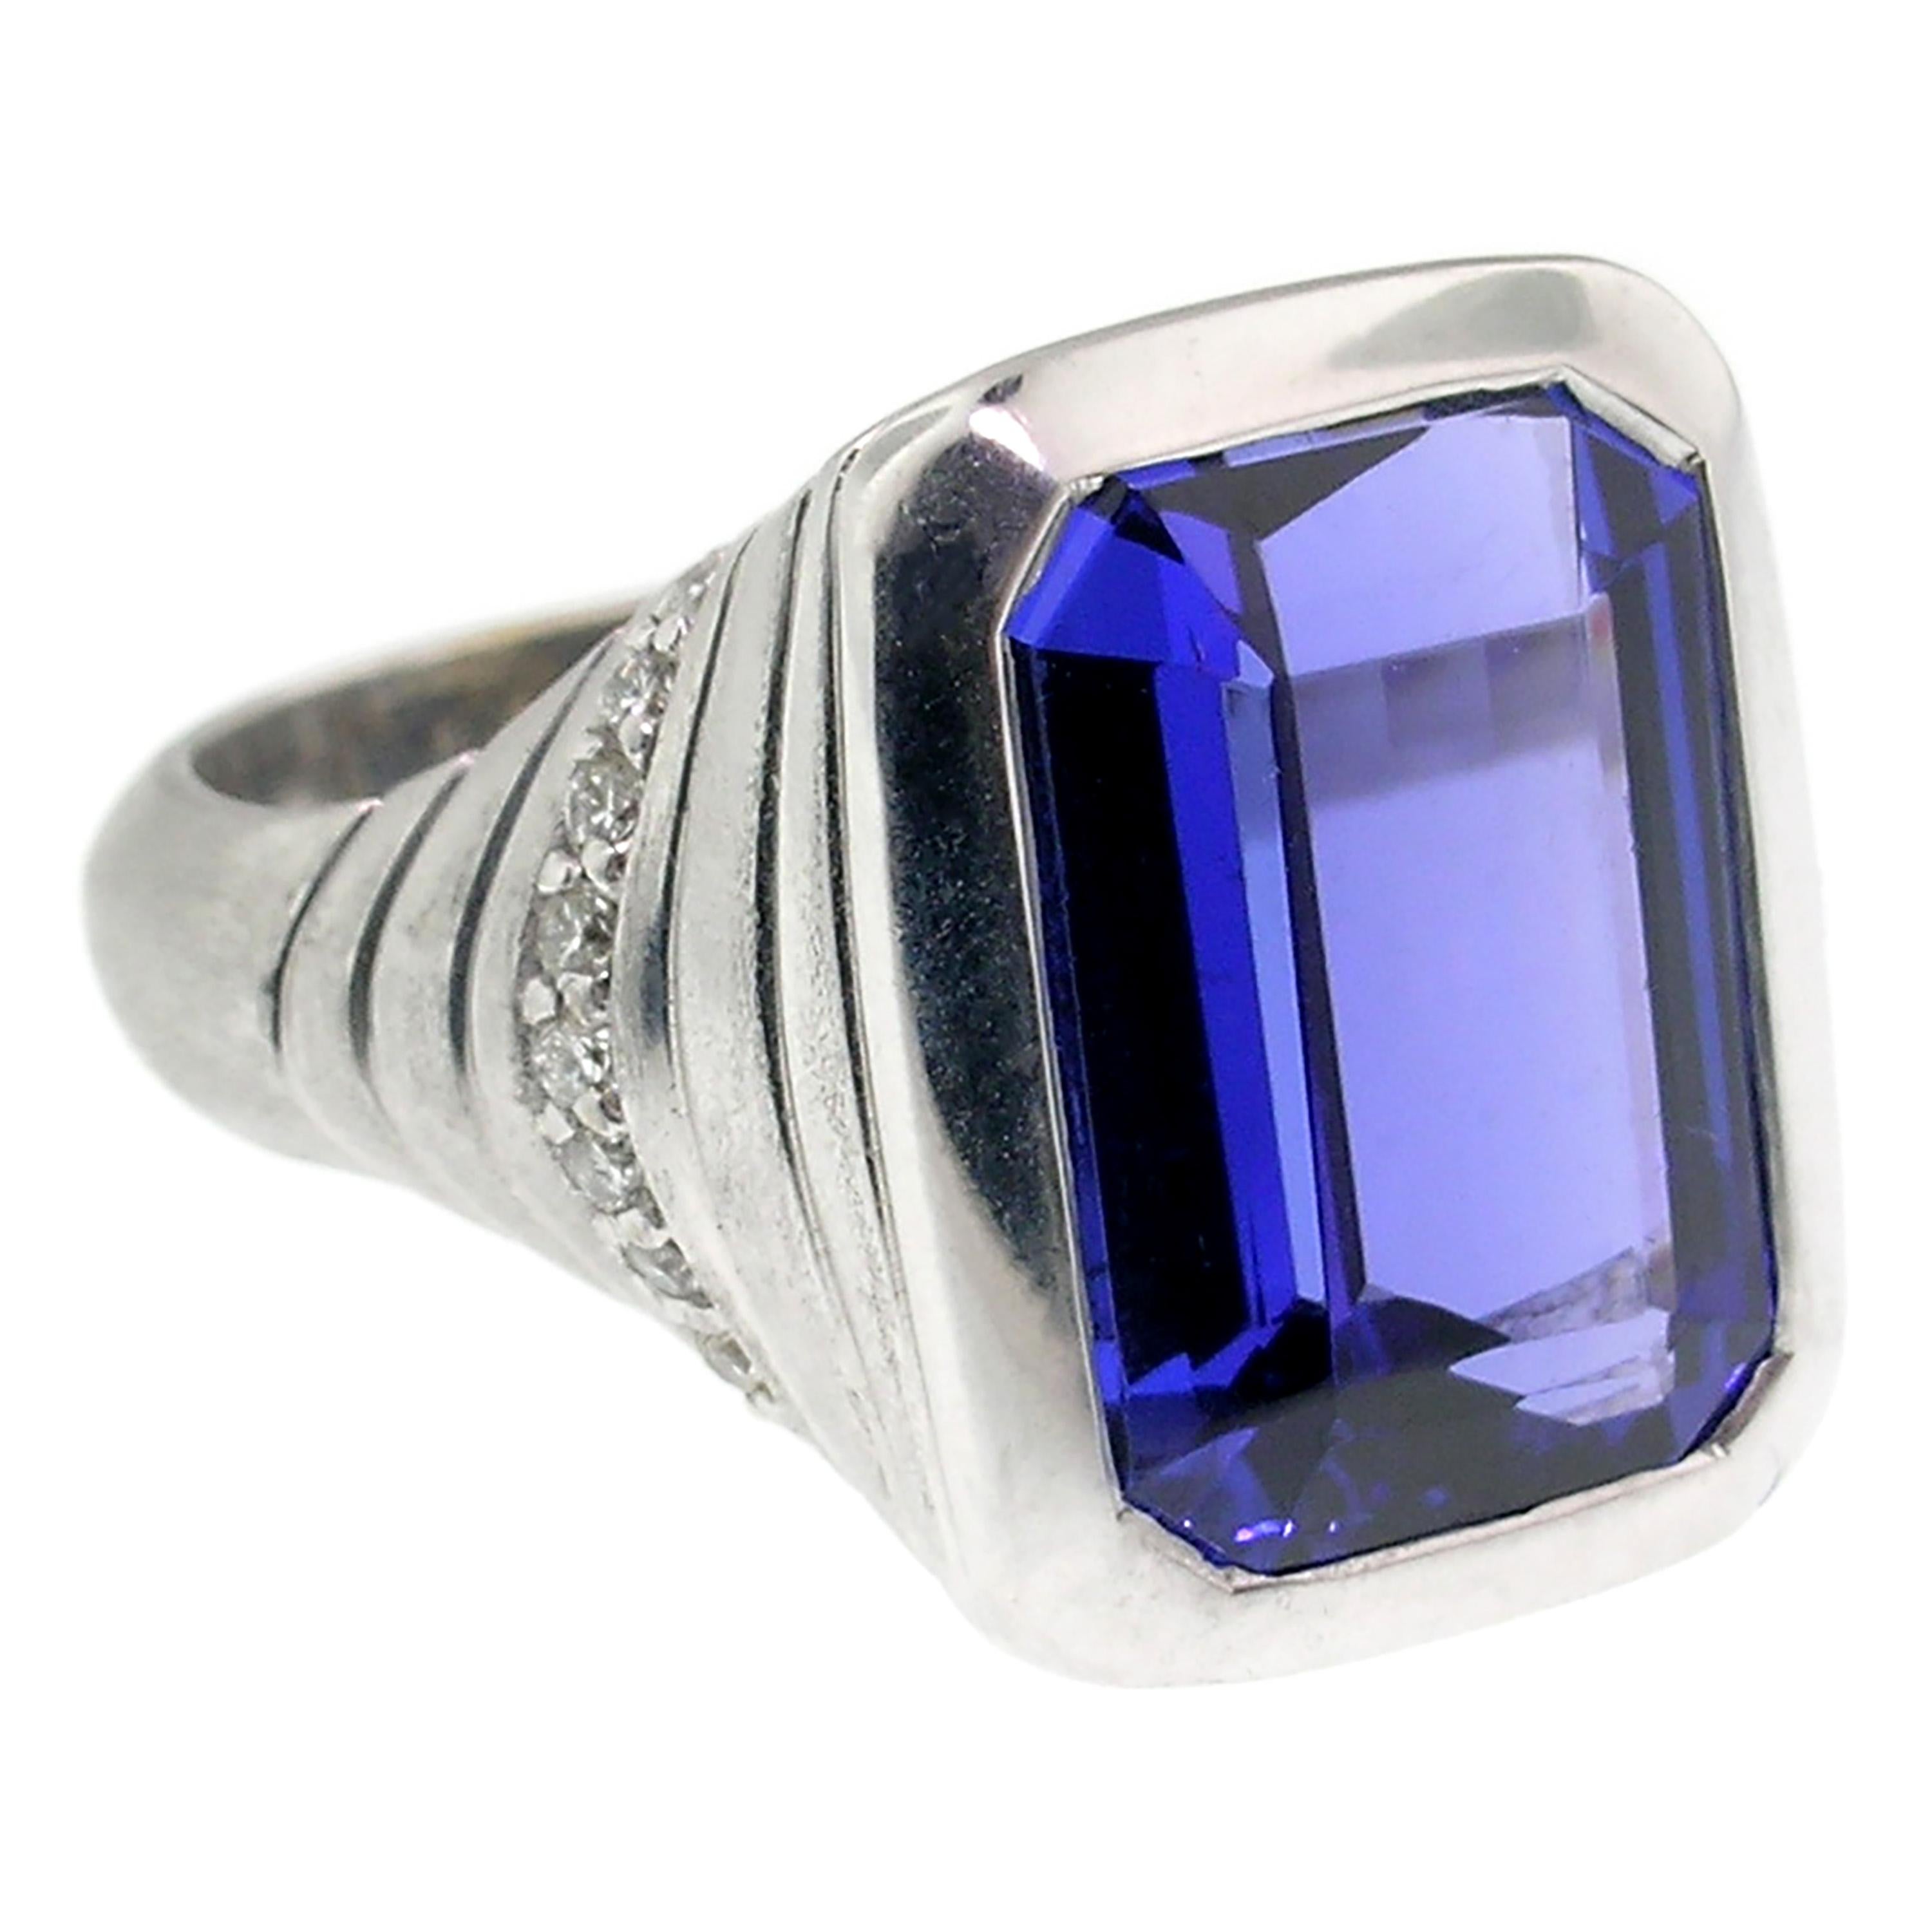 This 7.29ct emerald cut tanzanite is a lovely example of the material with a gorgeous and saturated color. This classic pleochroic gem shows rich blue, gorgeous violet, and flashes of red fire.

This beautiful custom 18kt white gold ring is clean